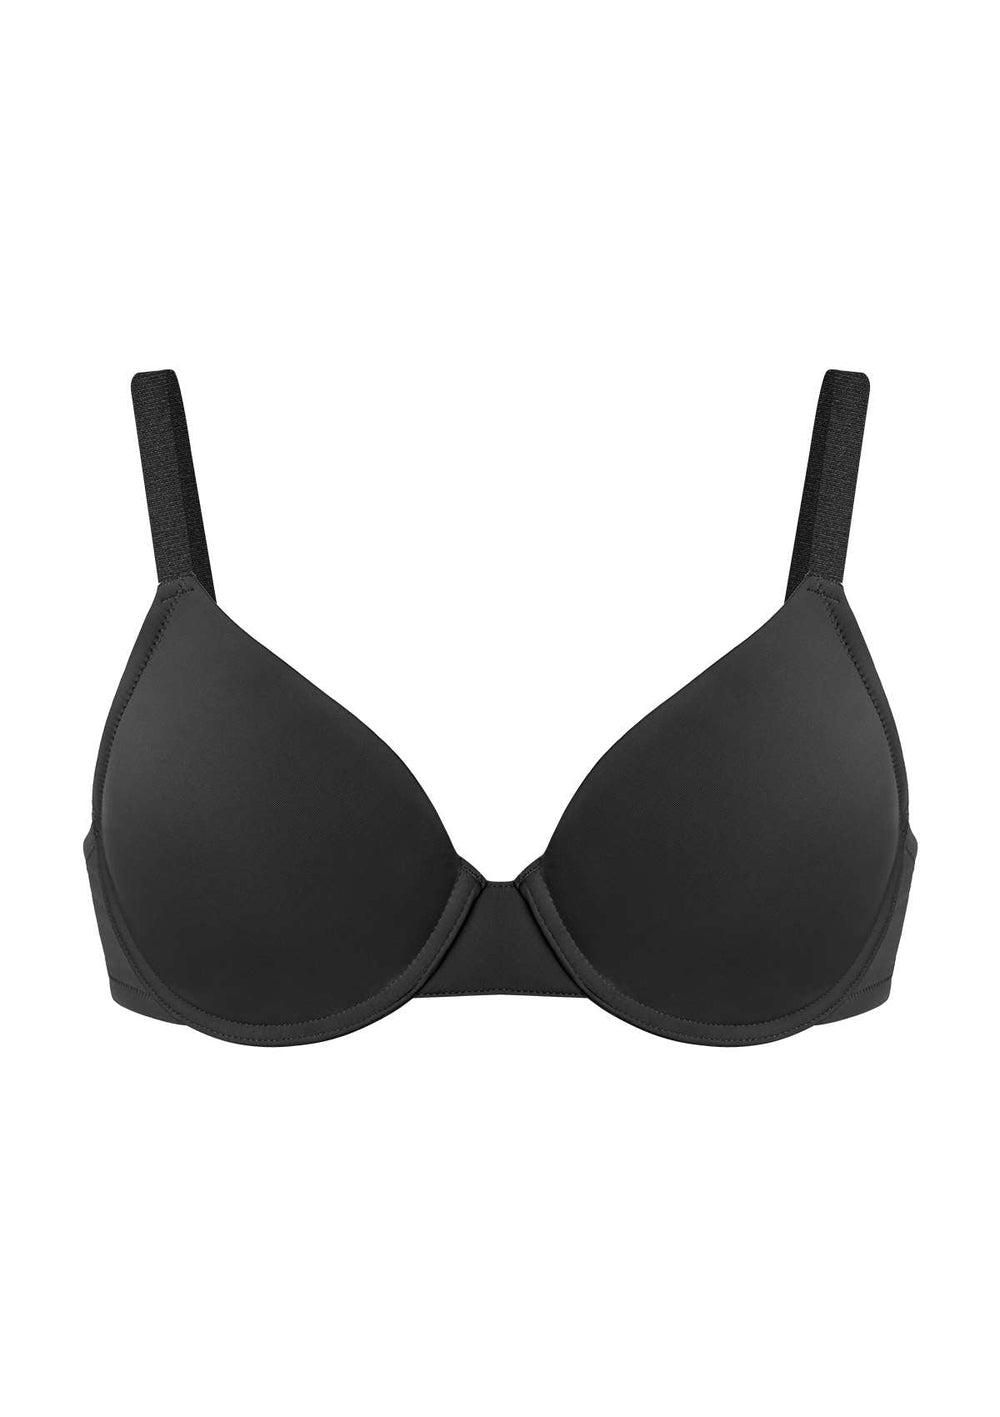  t Shirt Bra Sweatshirt for Prime Deals of The Day Today only  Front Closure Bras for Women Floral Print Adjustable Strap Minimizer Bra  Seamless Plus Size Every Day Bras Black Small 